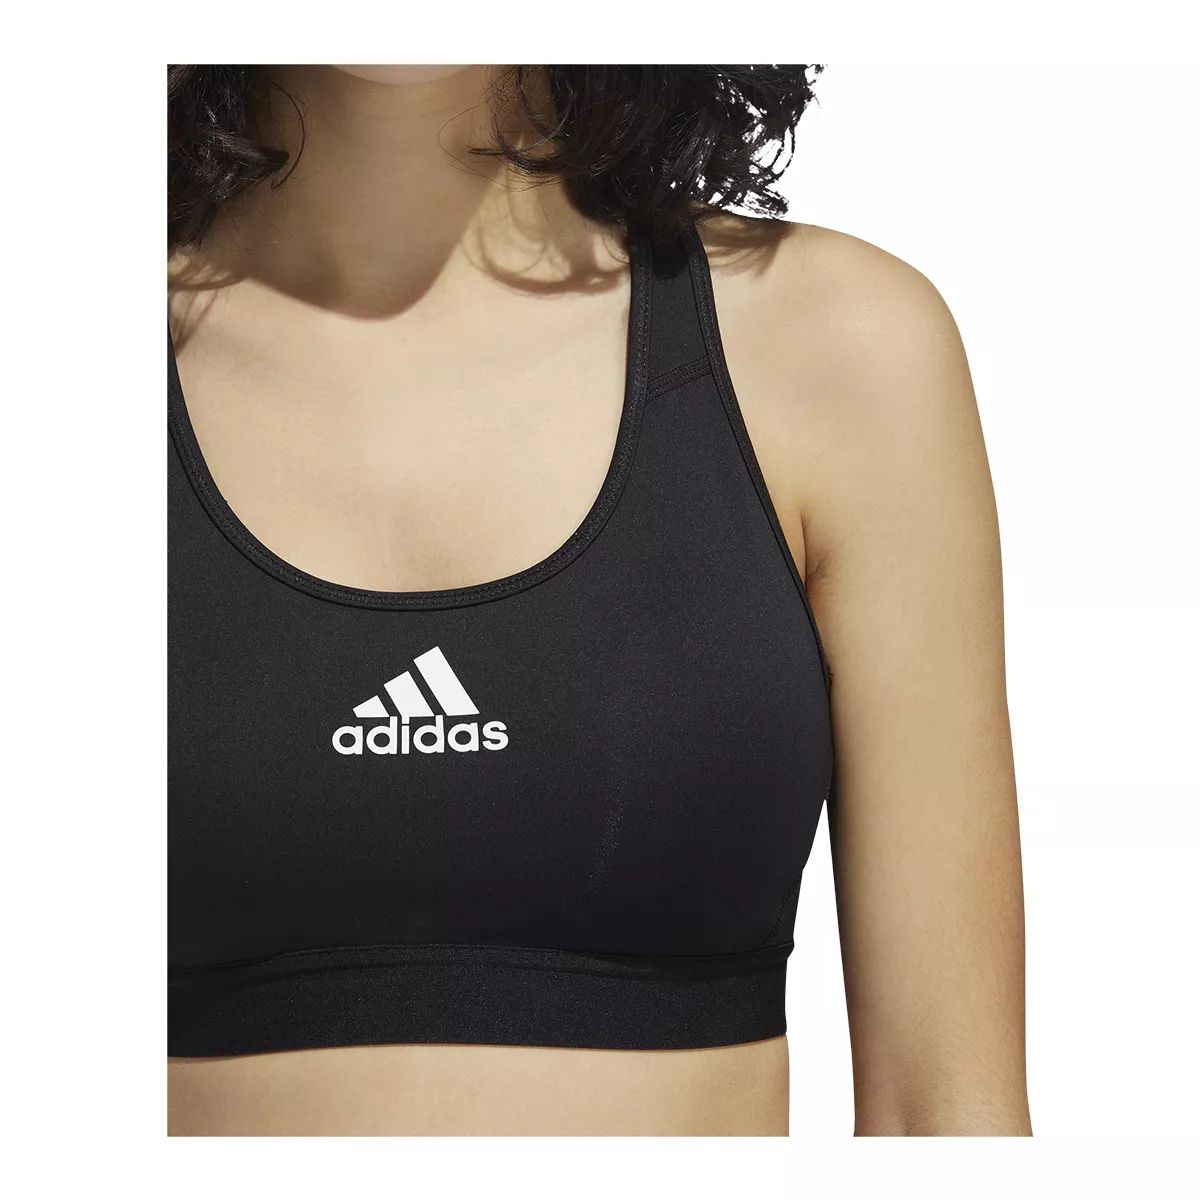 https://media-www.atmosphere.ca/product/div-03-softgoods/dpt-70-athletic-clothing/sdpt-02-womens/333070642/adidas-w-don-t-rest-alphaskin-black-white-xs--72df5294-e41b-4882-9b7b-59f1e86a5105-jpgrendition.jpg?imdensity=1&imwidth=1244&impolicy=mZoom